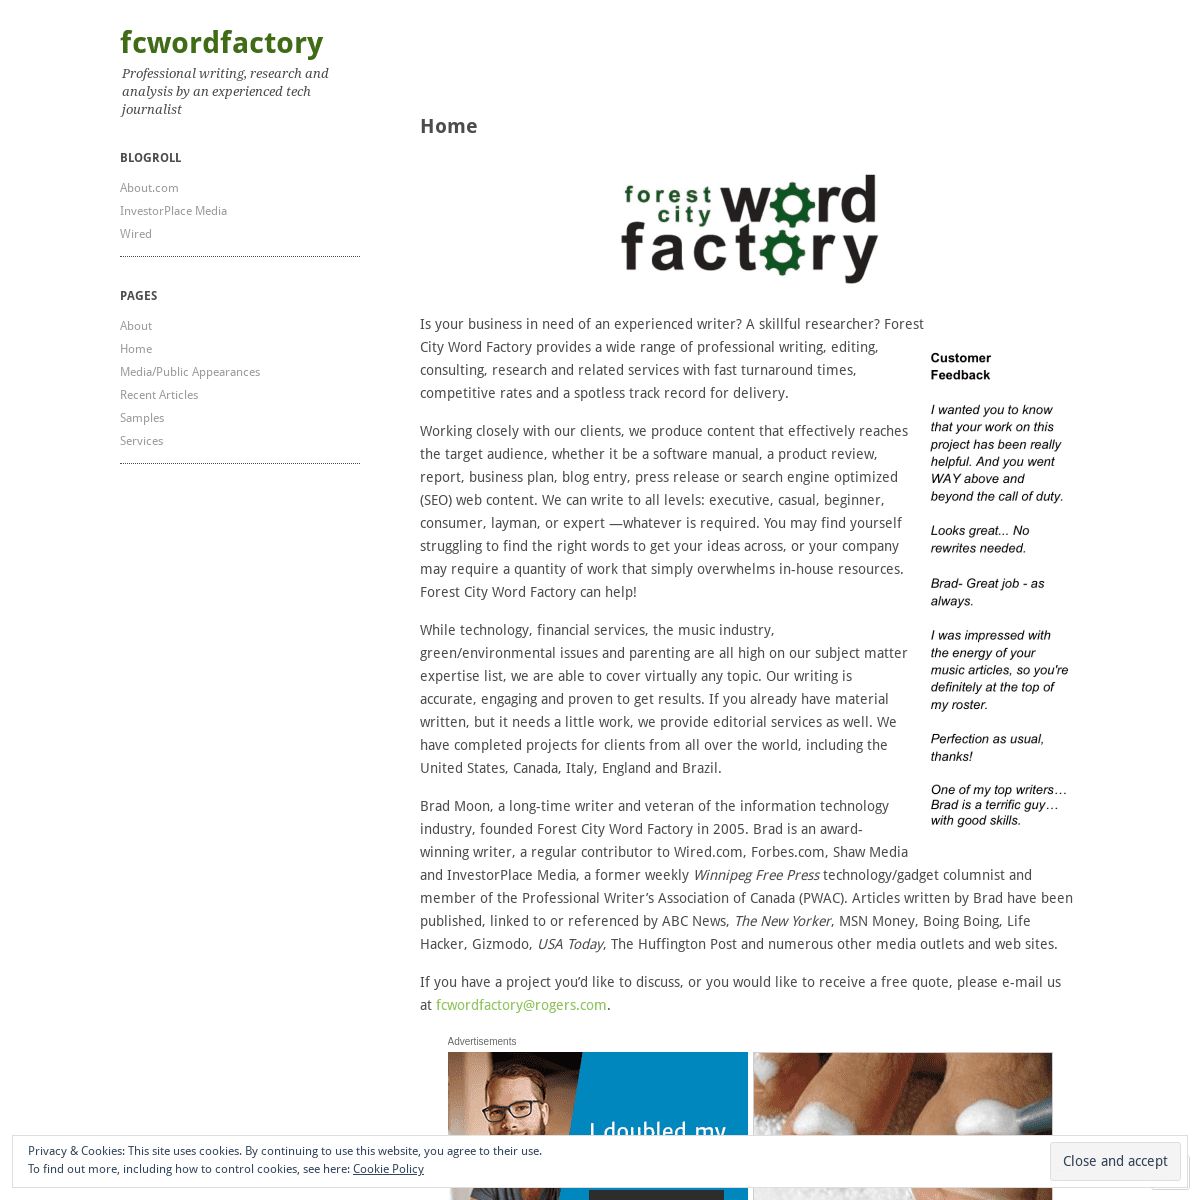 A complete backup of fcwordfactory.com